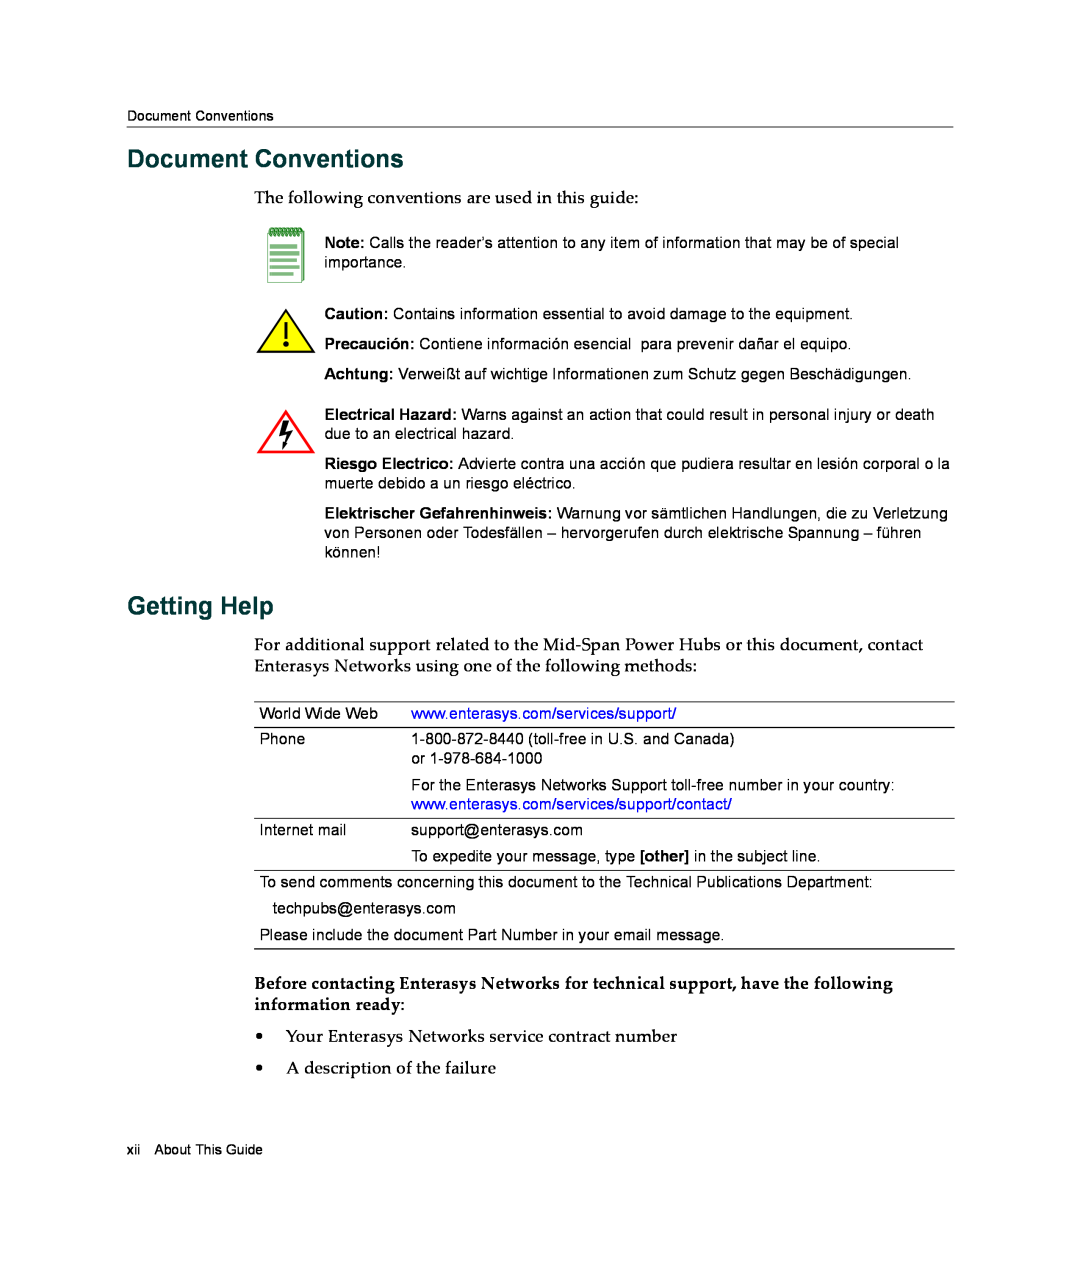 Enterasys Networks BL-6000ENT manual Document Conventions, Getting Help, The following conventions are used in this guide 